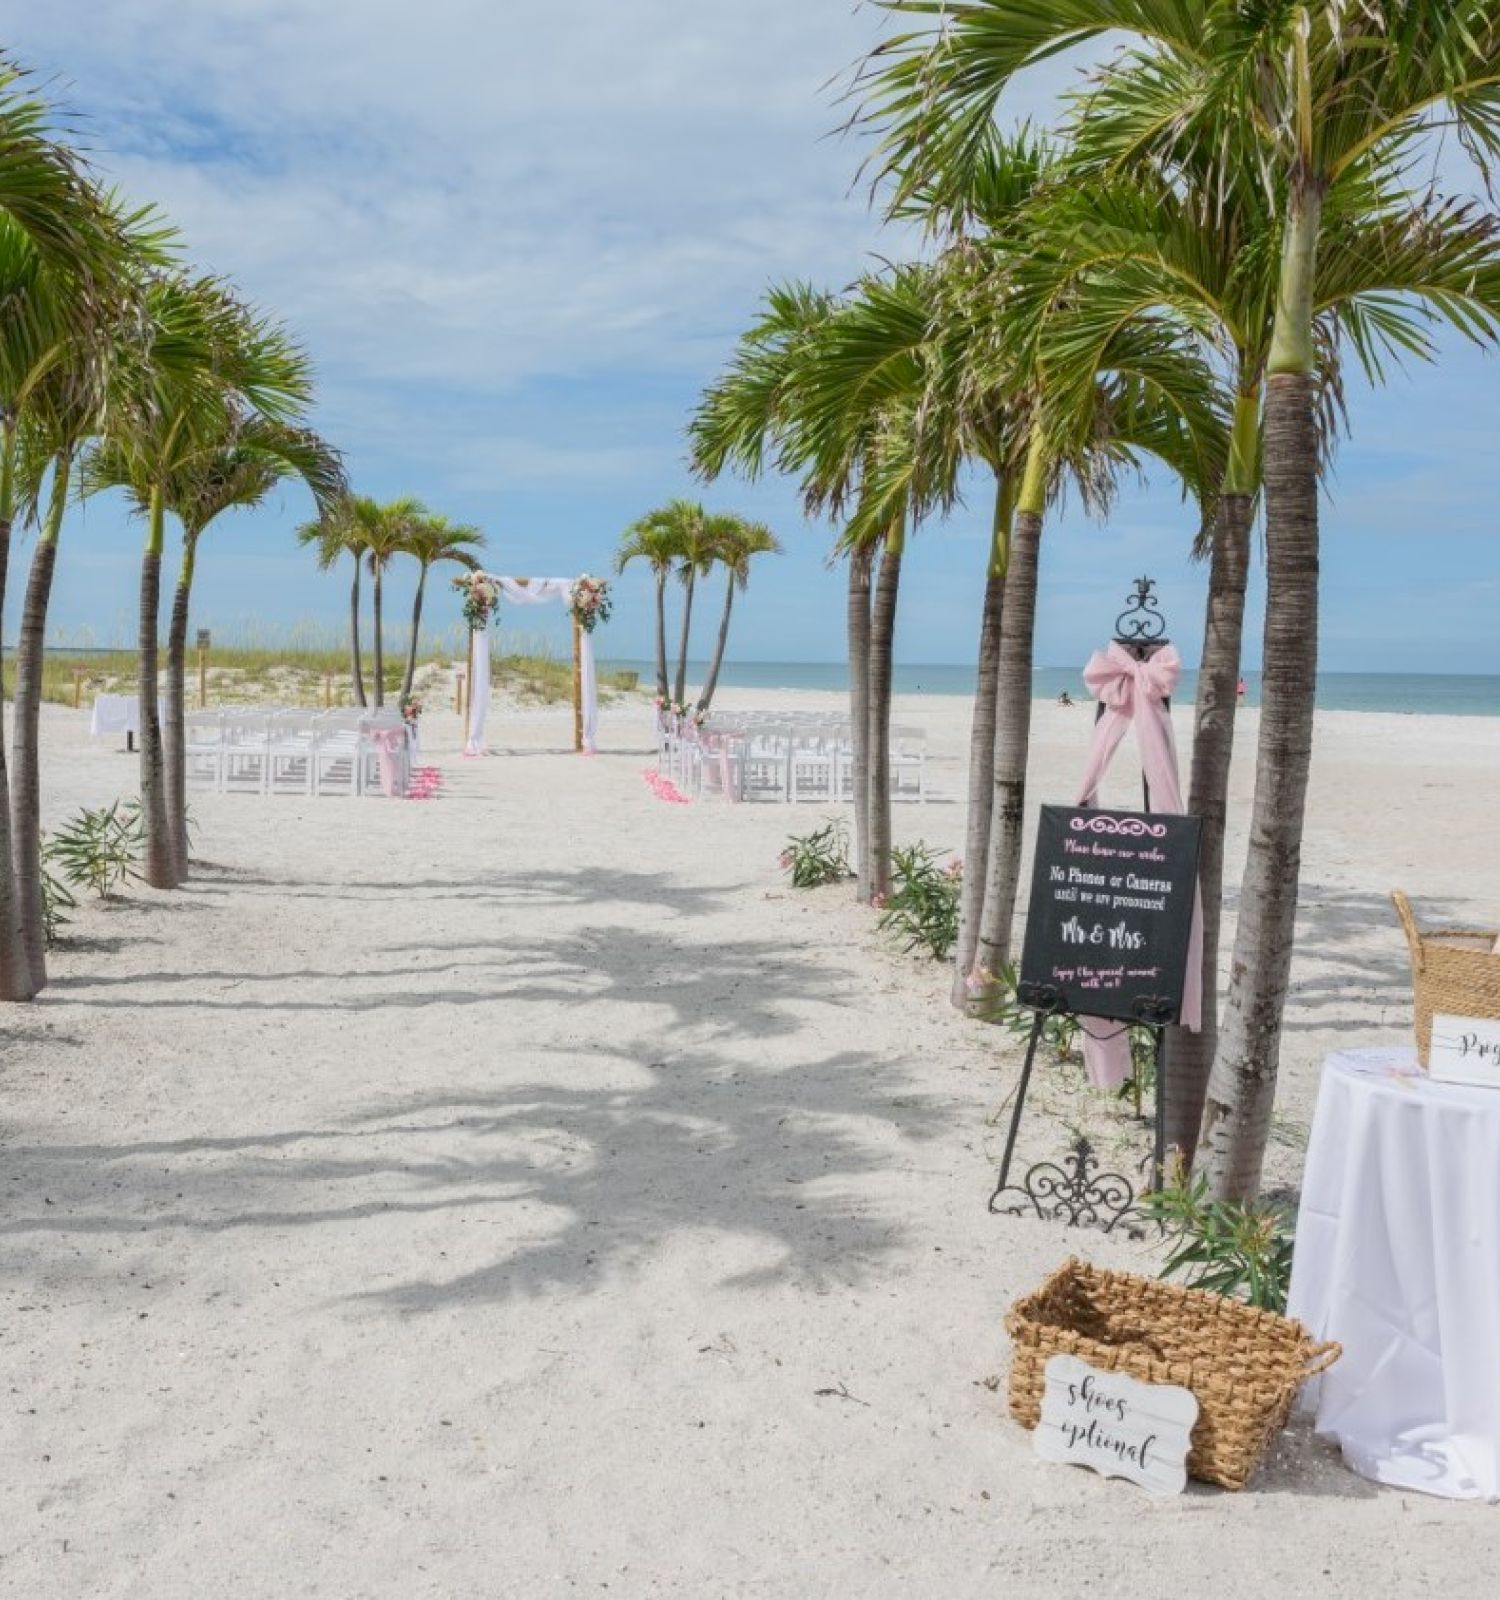 A beach wedding setup with palm trees, a chalkboard sign, and chairs arranged facing the sea. There's a table with a sign-in book and a basket.